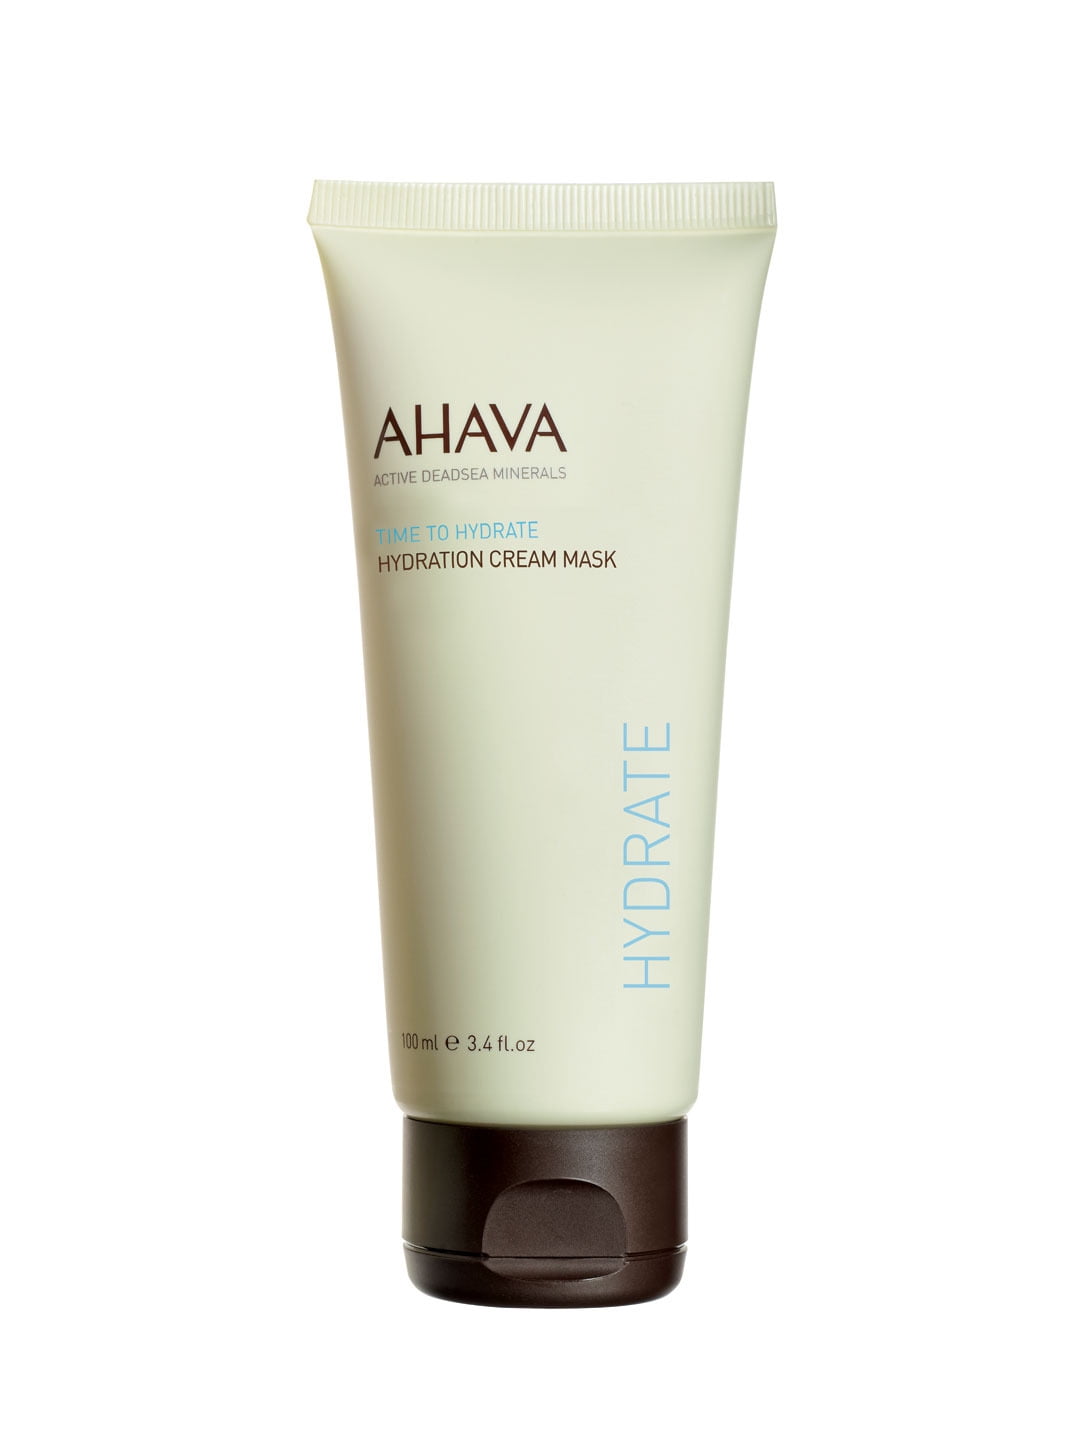 AHAVA - Time To Hydrate - Mask Facial 3.4 Hydration Cream oz